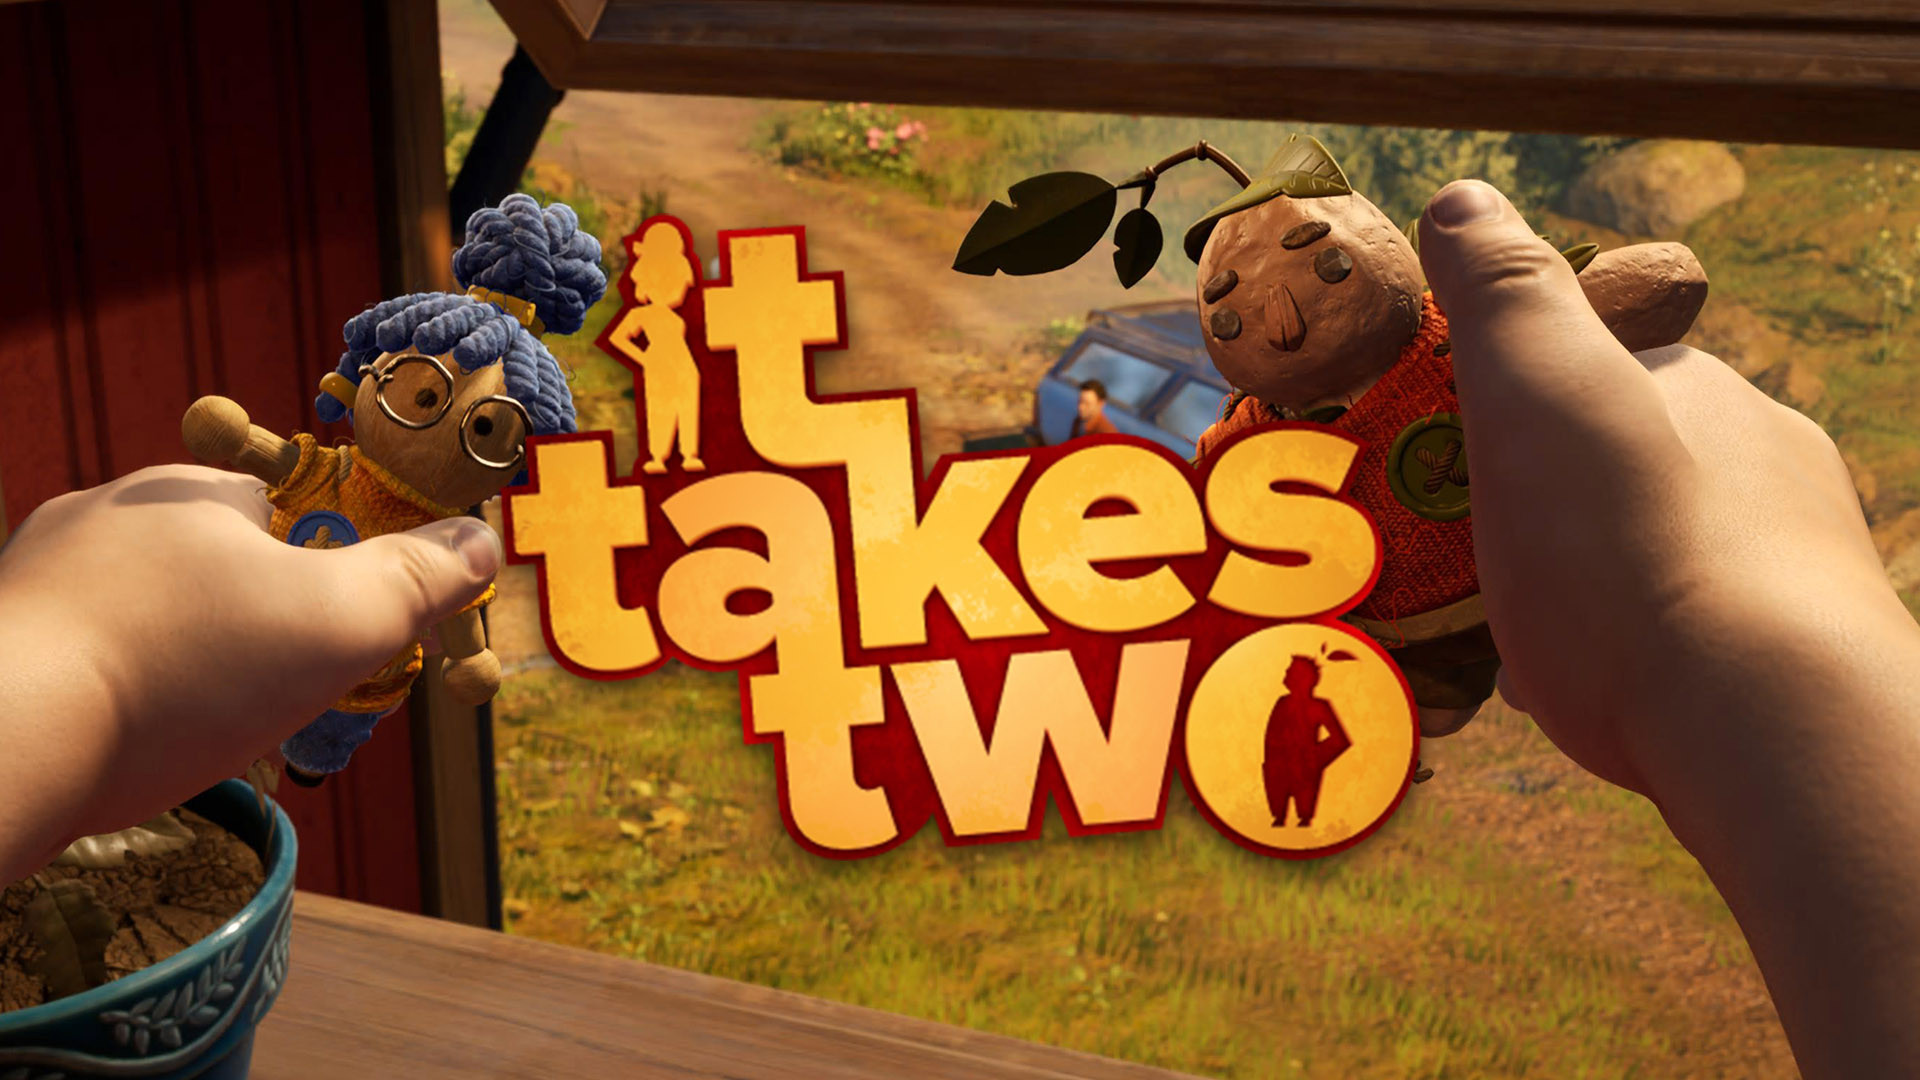 Take 2 игры. It takes too игра. It takes two (2021). Take two игра. It takes two игра года.